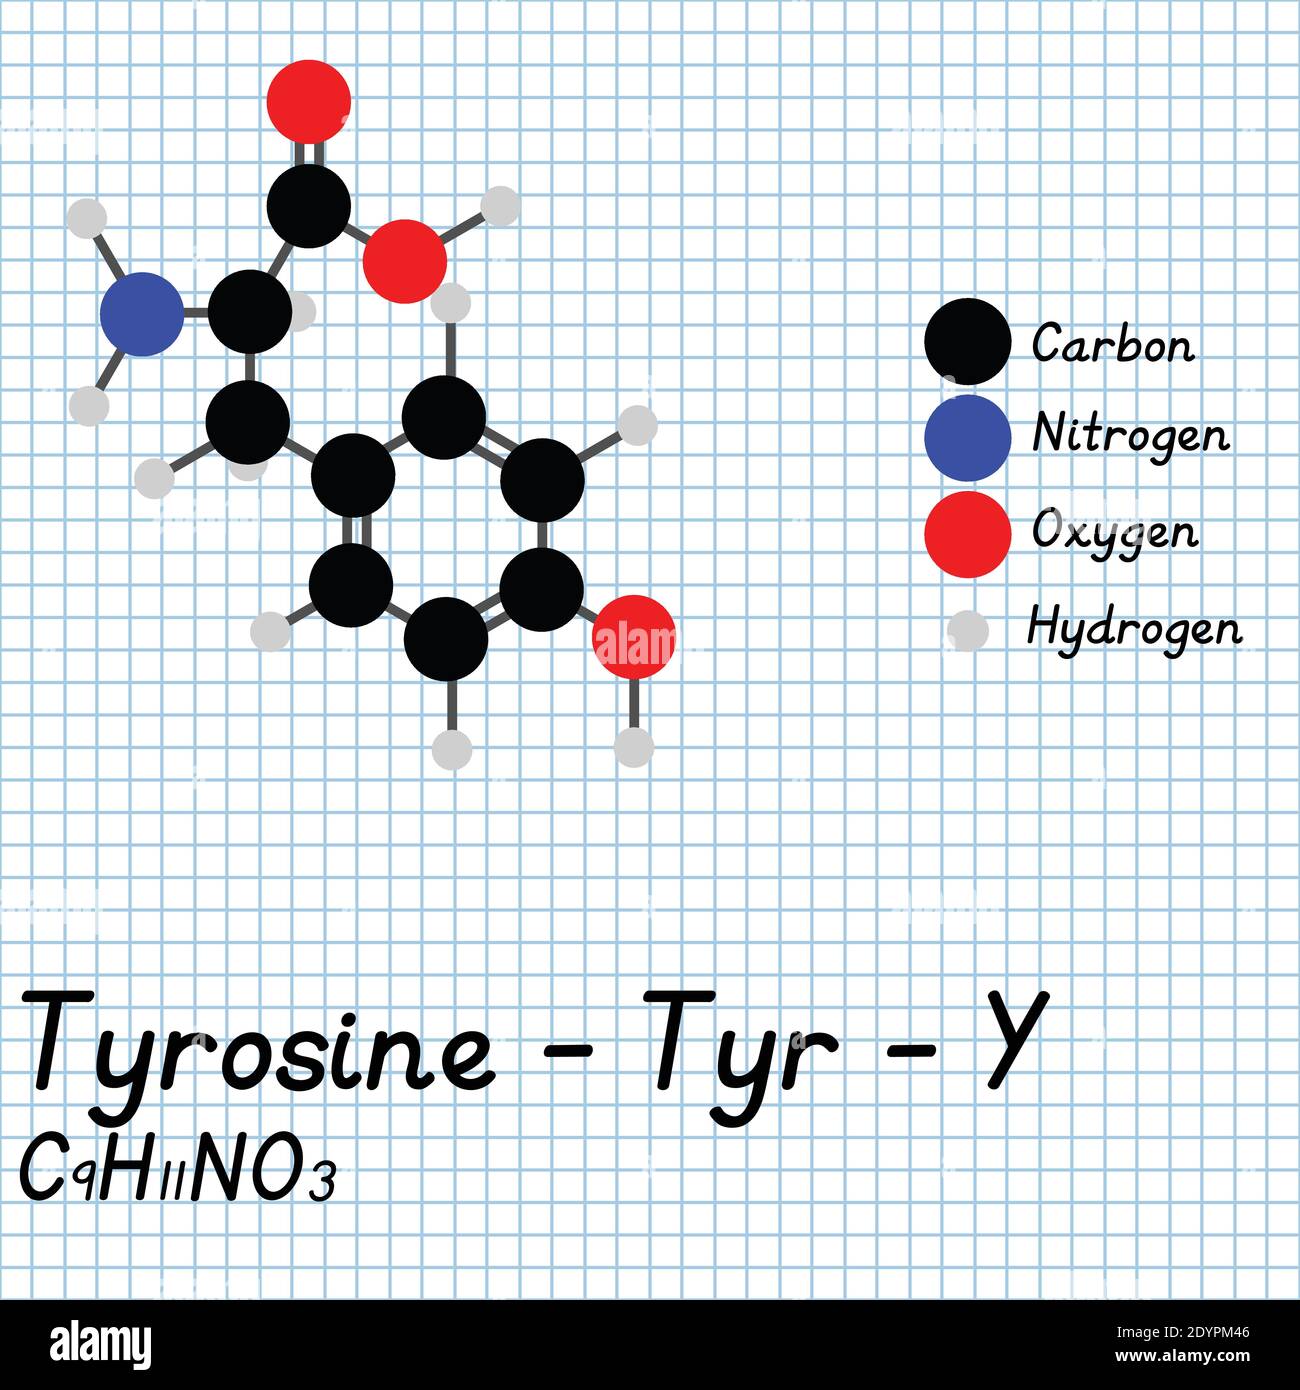 Tyrosine - Tyr - Y Amino Acid molecular formula and chemical structure . 2D Ball and stick model on school paper sheet background. EPS10 Stock Vector